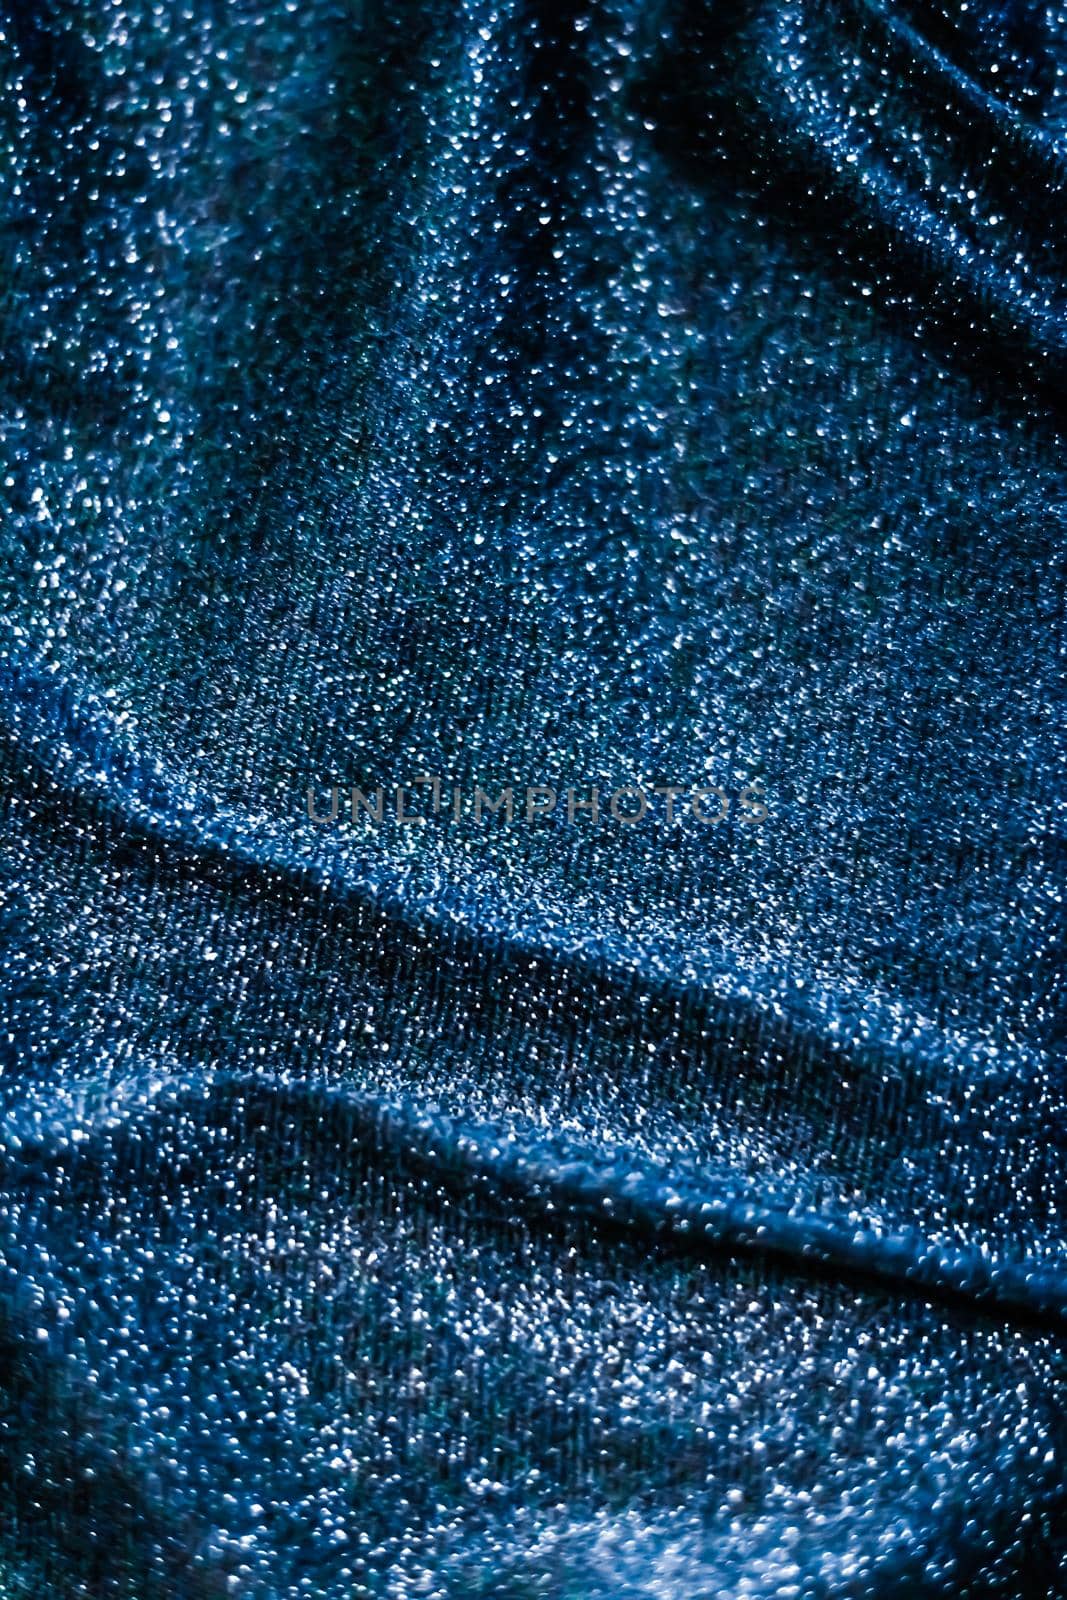 Luxe glowing texture, night club branding and New Years party concept - Blue holiday sparkling glitter abstract background, luxury shiny fabric material for glamour design and festive invitation